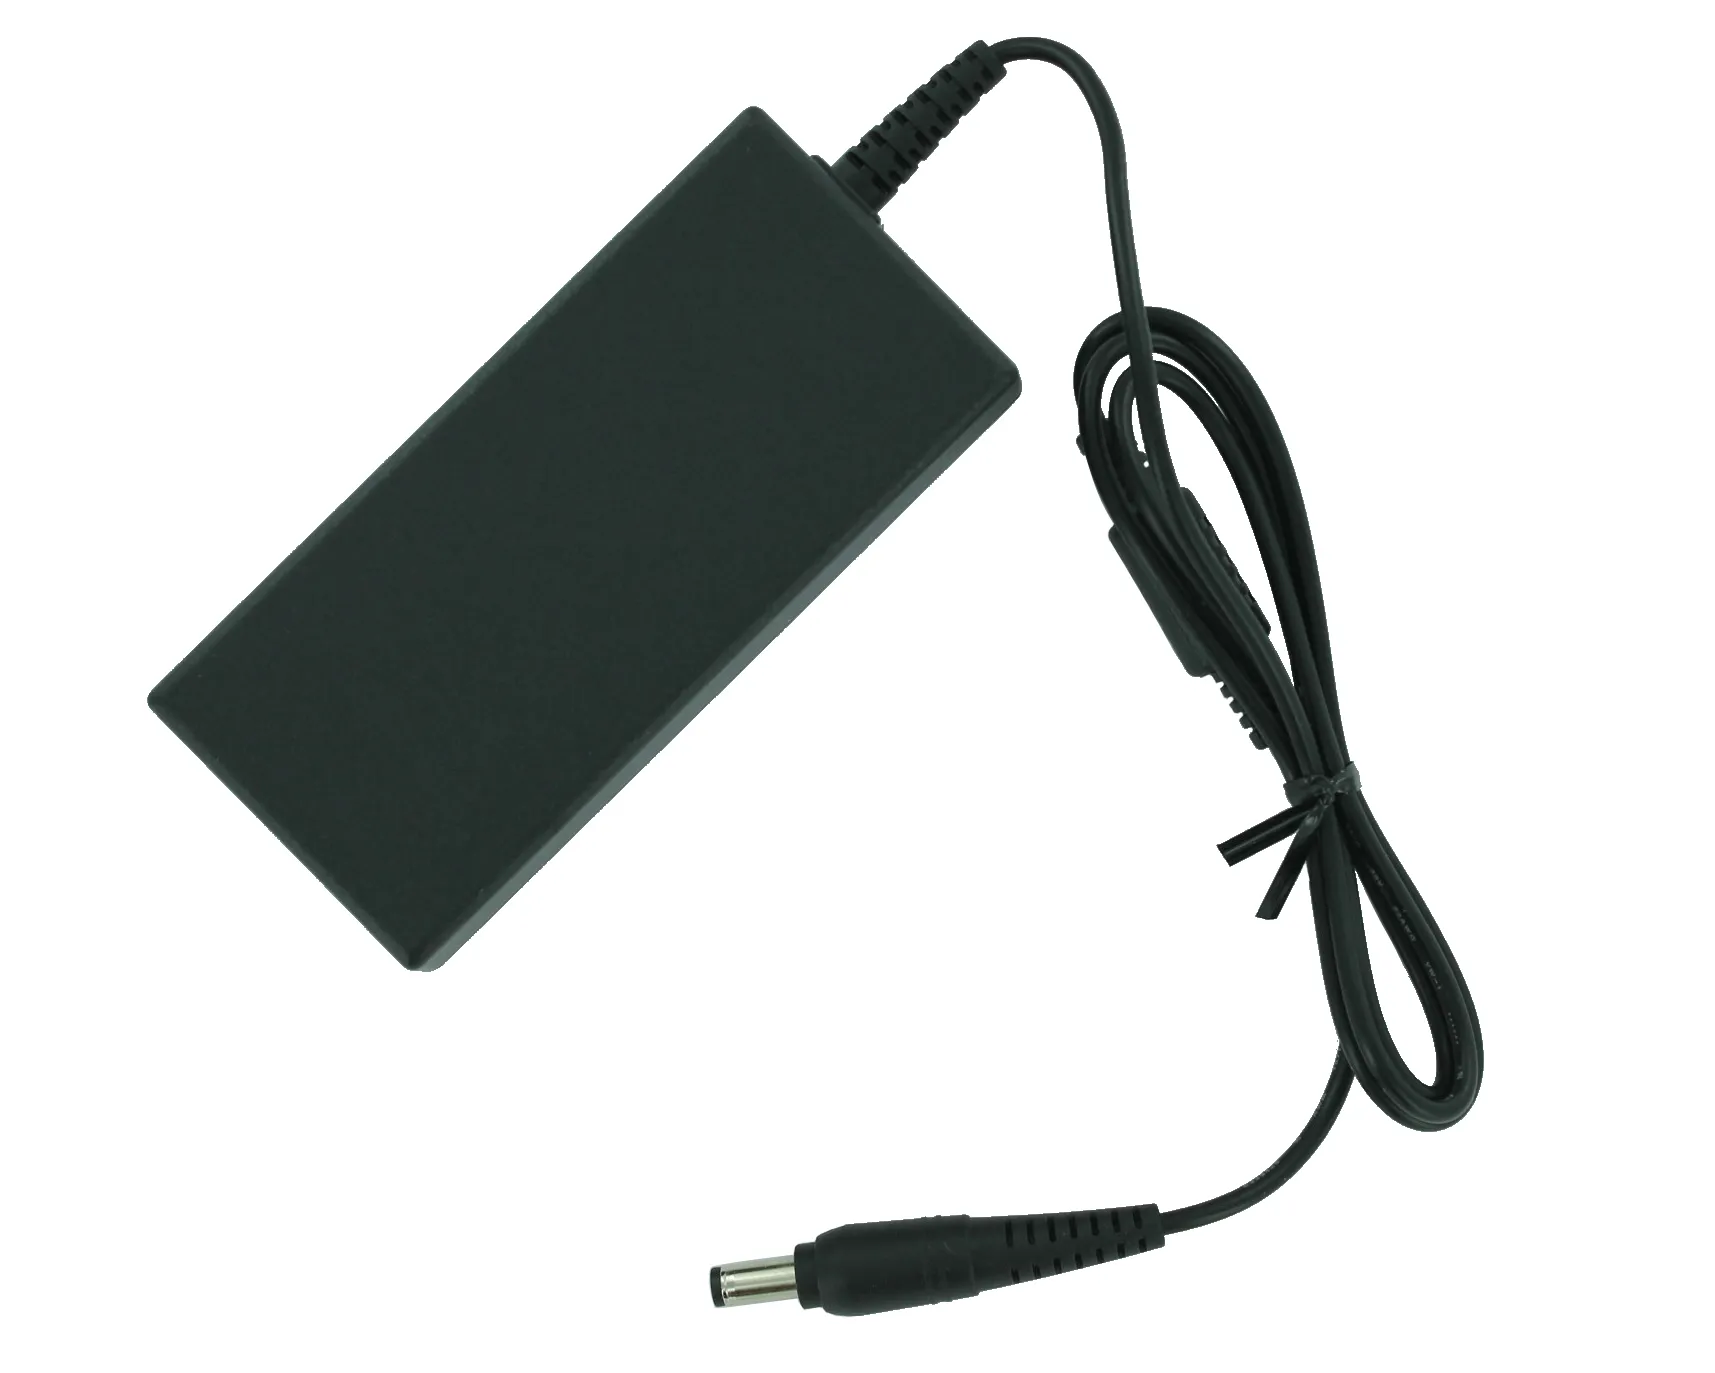 HP N240H 23.8-INCH MONITOR - 2MW69AA Charger (AC Adapter) 911754-001